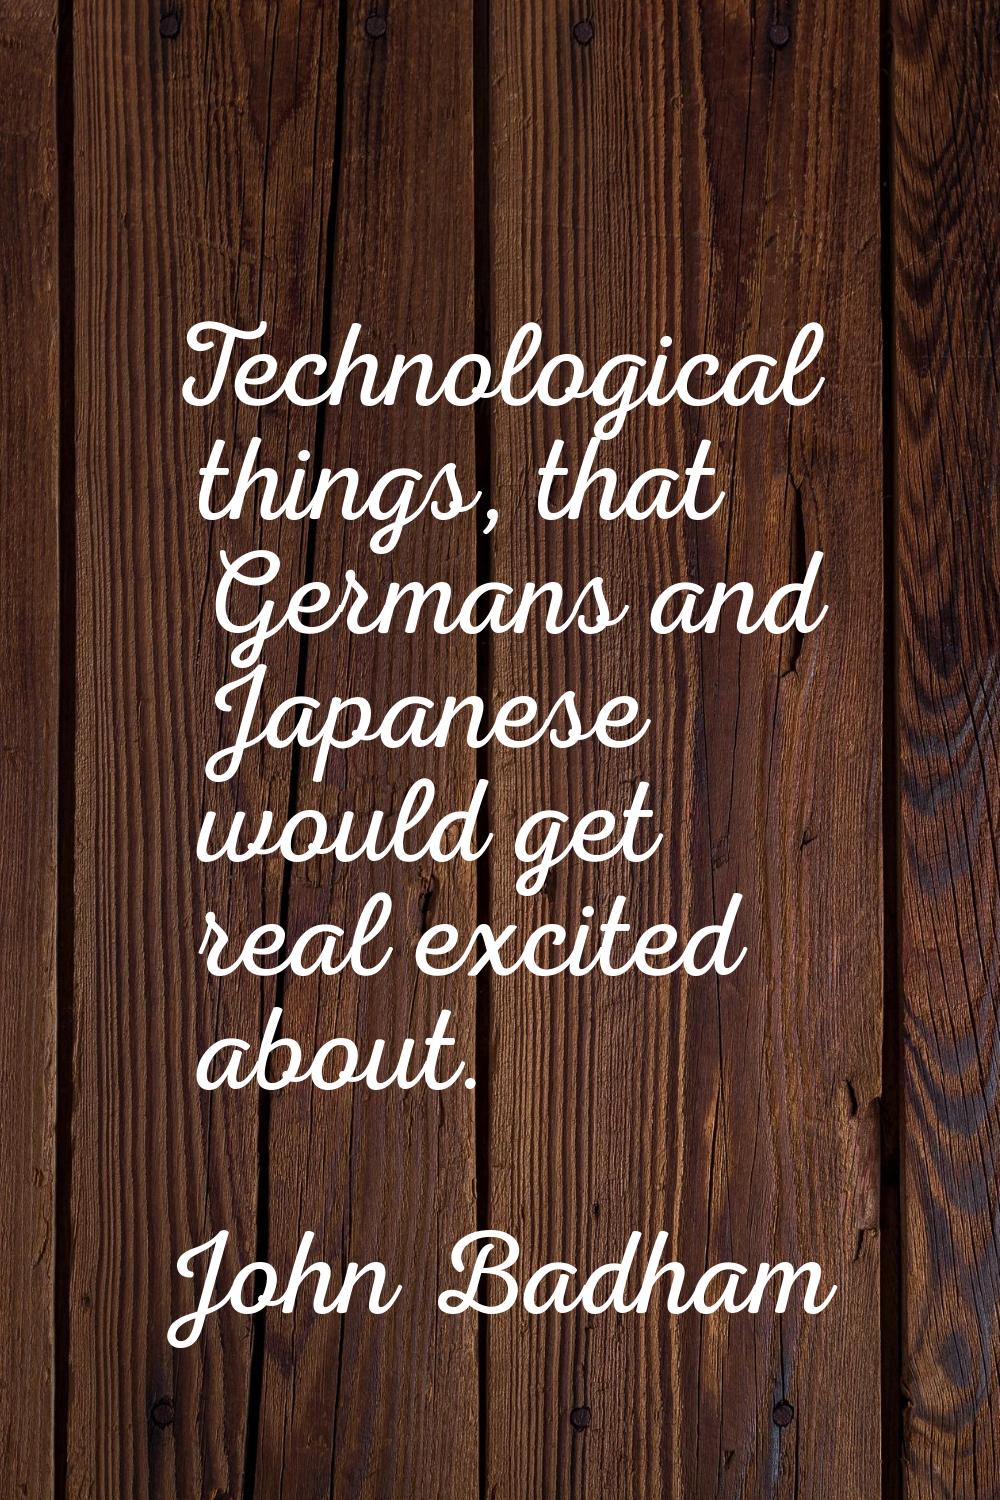 Technological things, that Germans and Japanese would get real excited about.